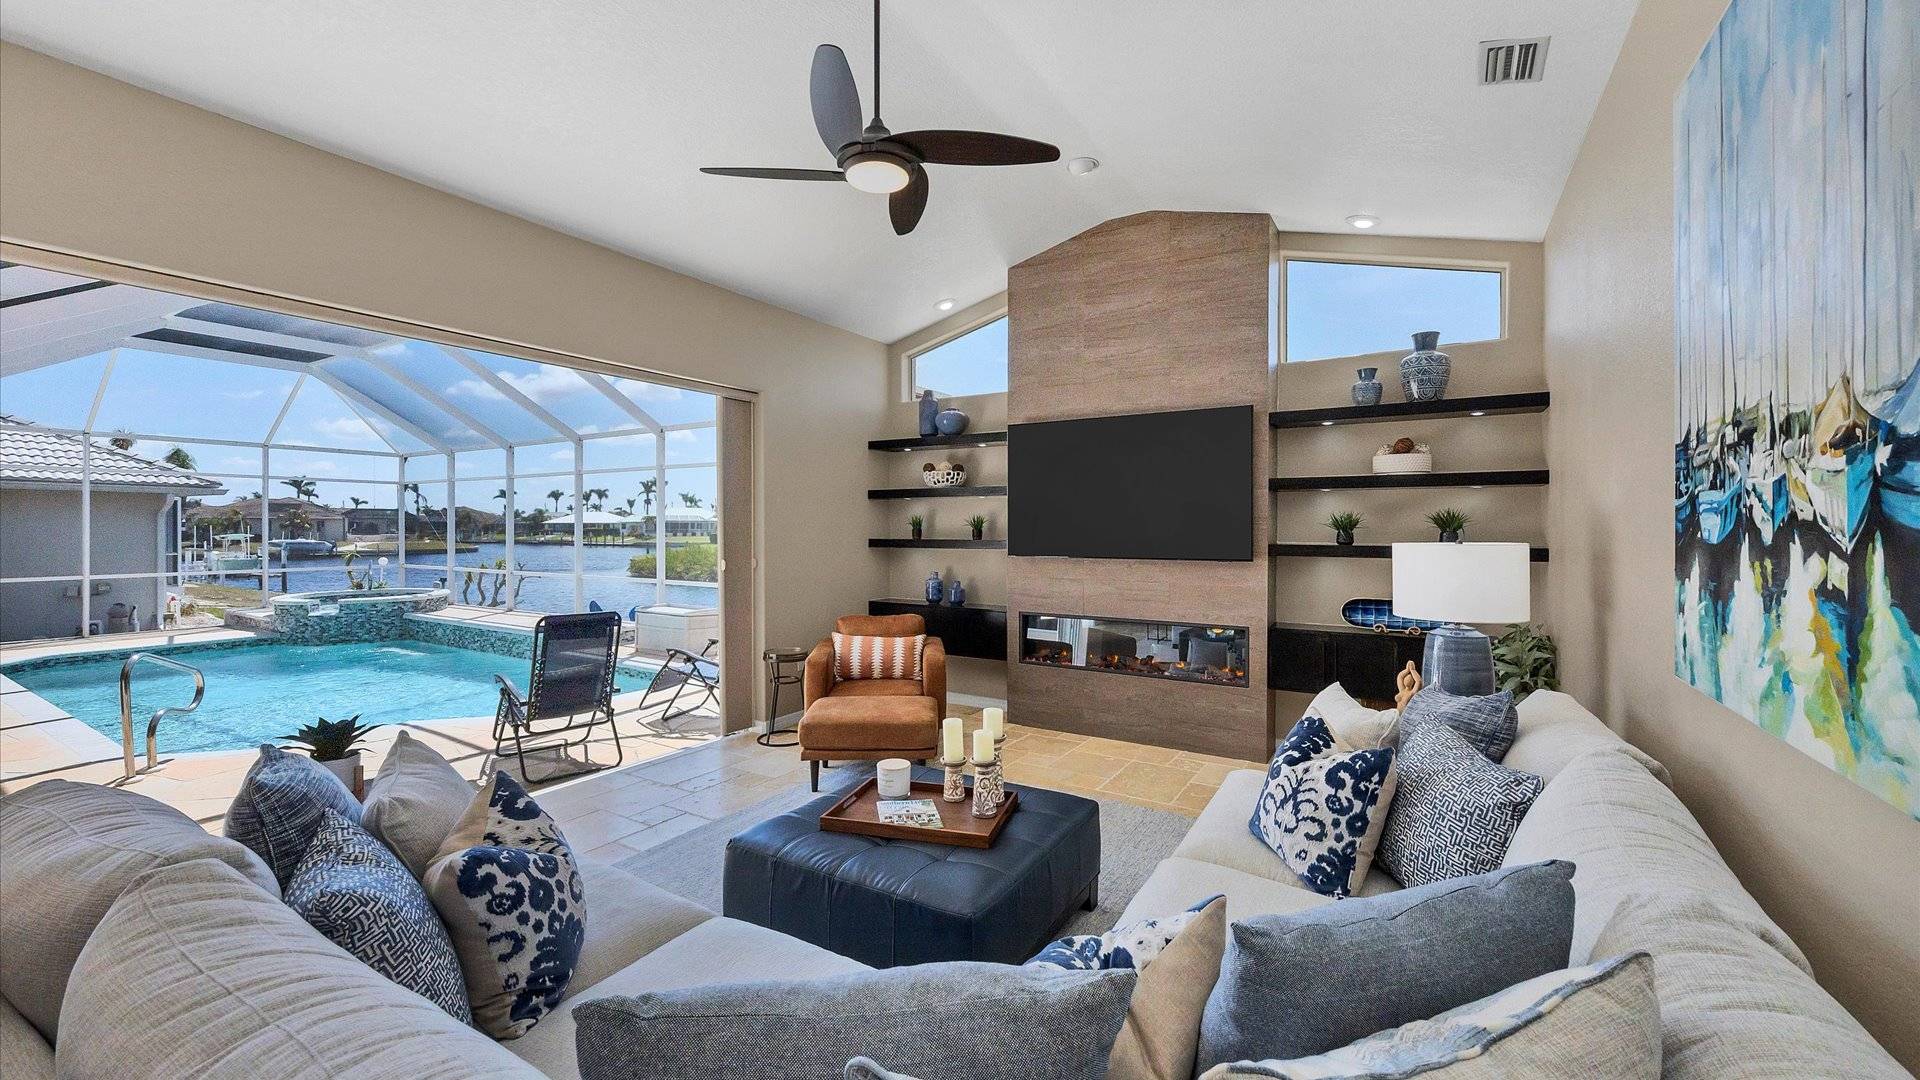 Incredible recently redone family room overlooking the lanai and pool